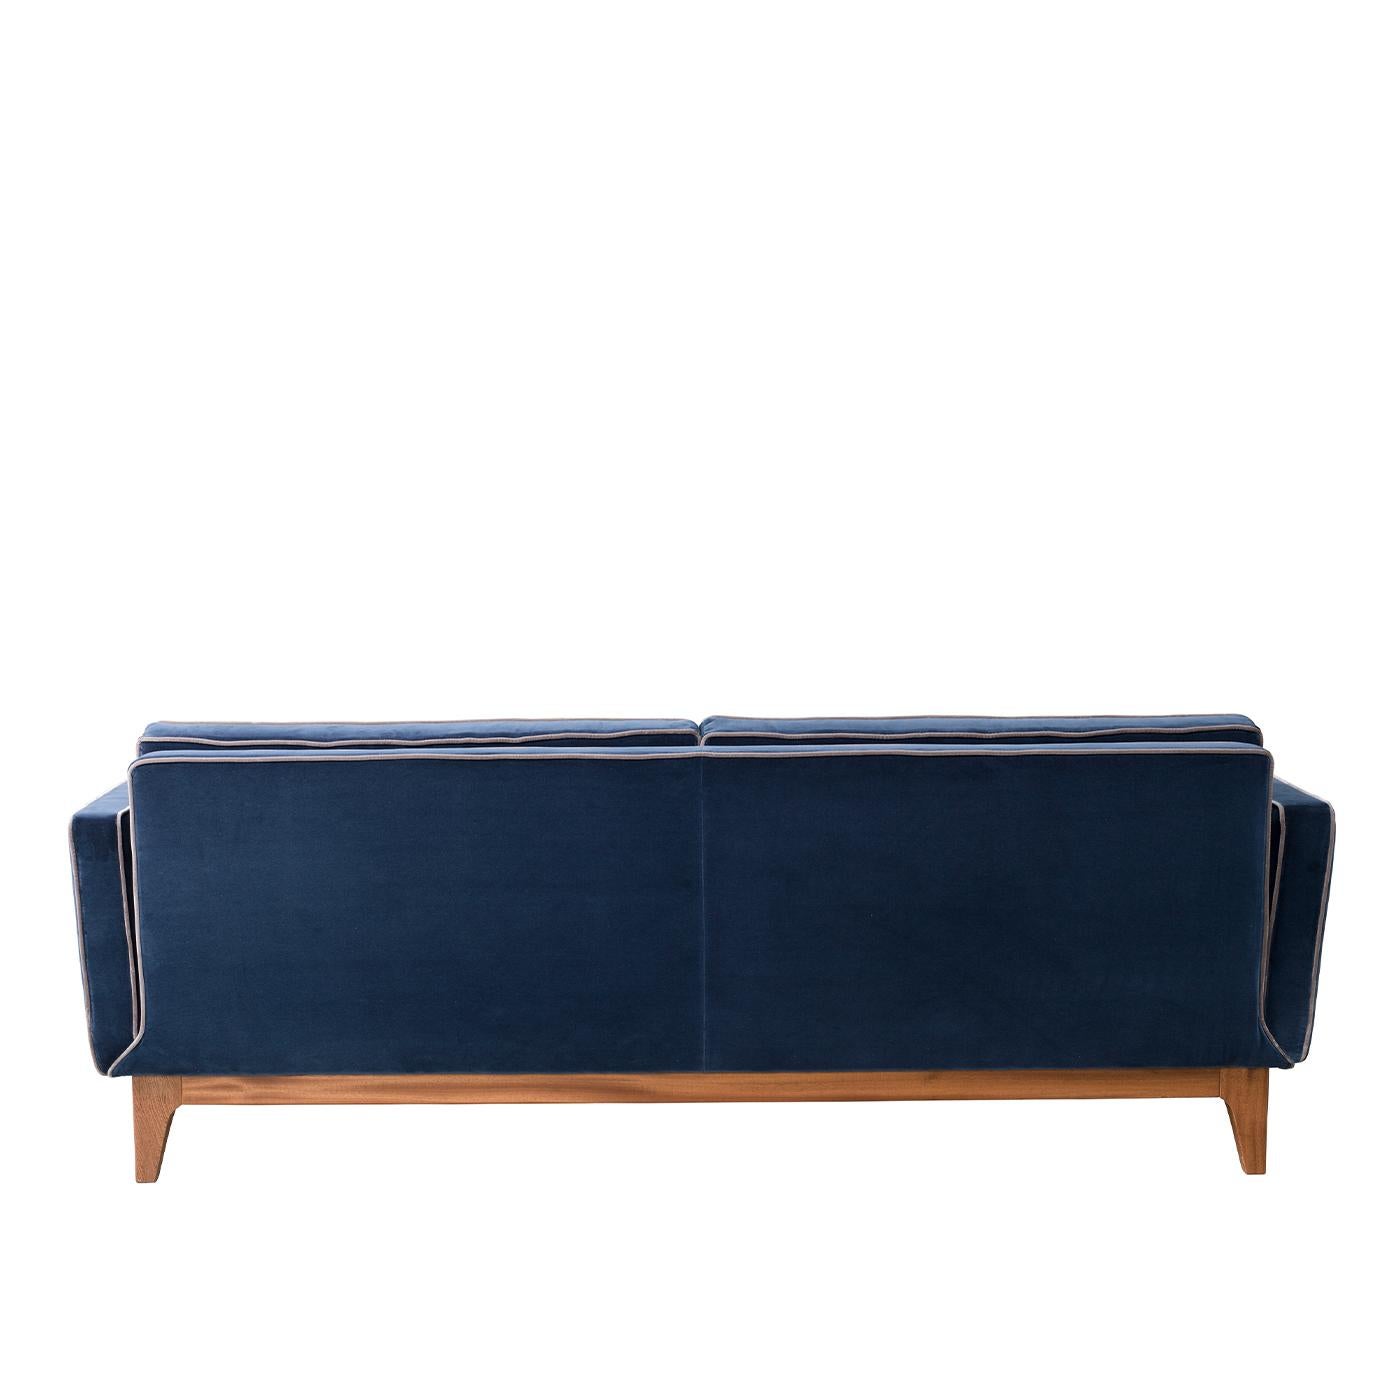 If you're looking to create a modern feel with traditional undertones, look no further than the Yvan Sofa. Supported by a solid mahogany base that channels mid-century influences, its deep blue velvet upholstery is accented with contrast trims and